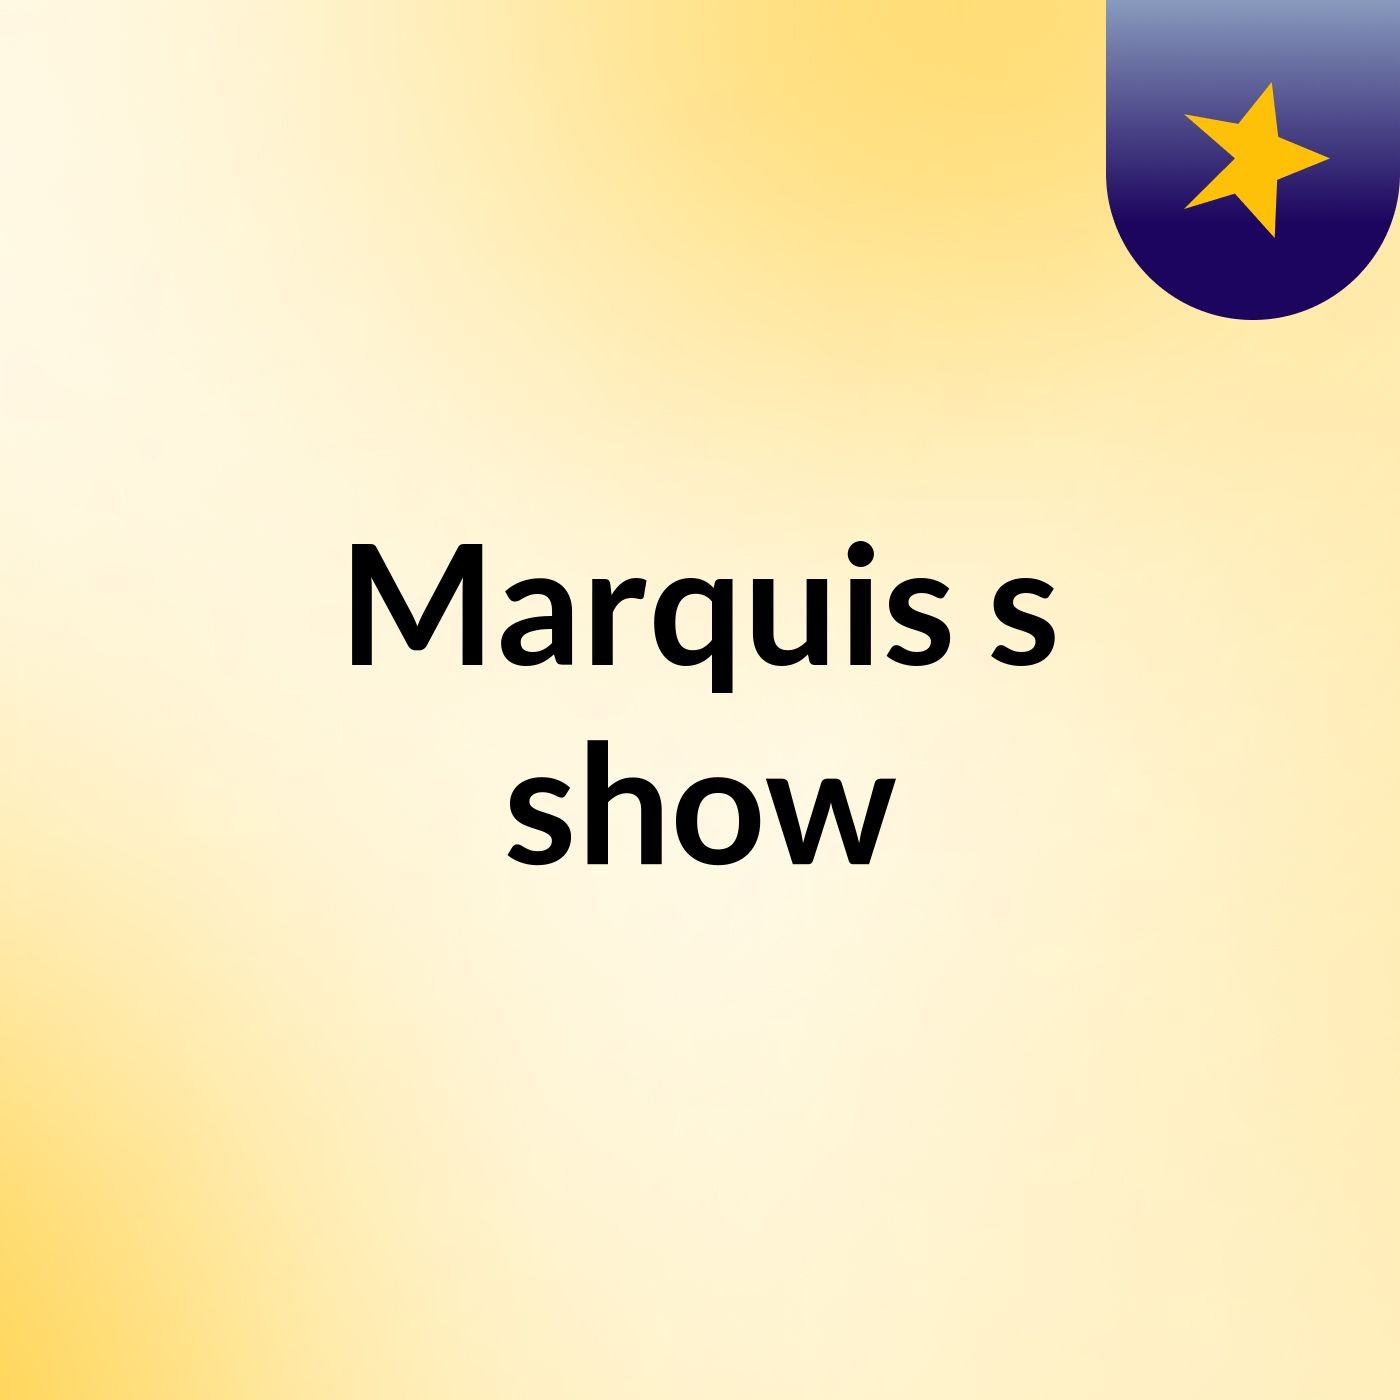 Marquis's show